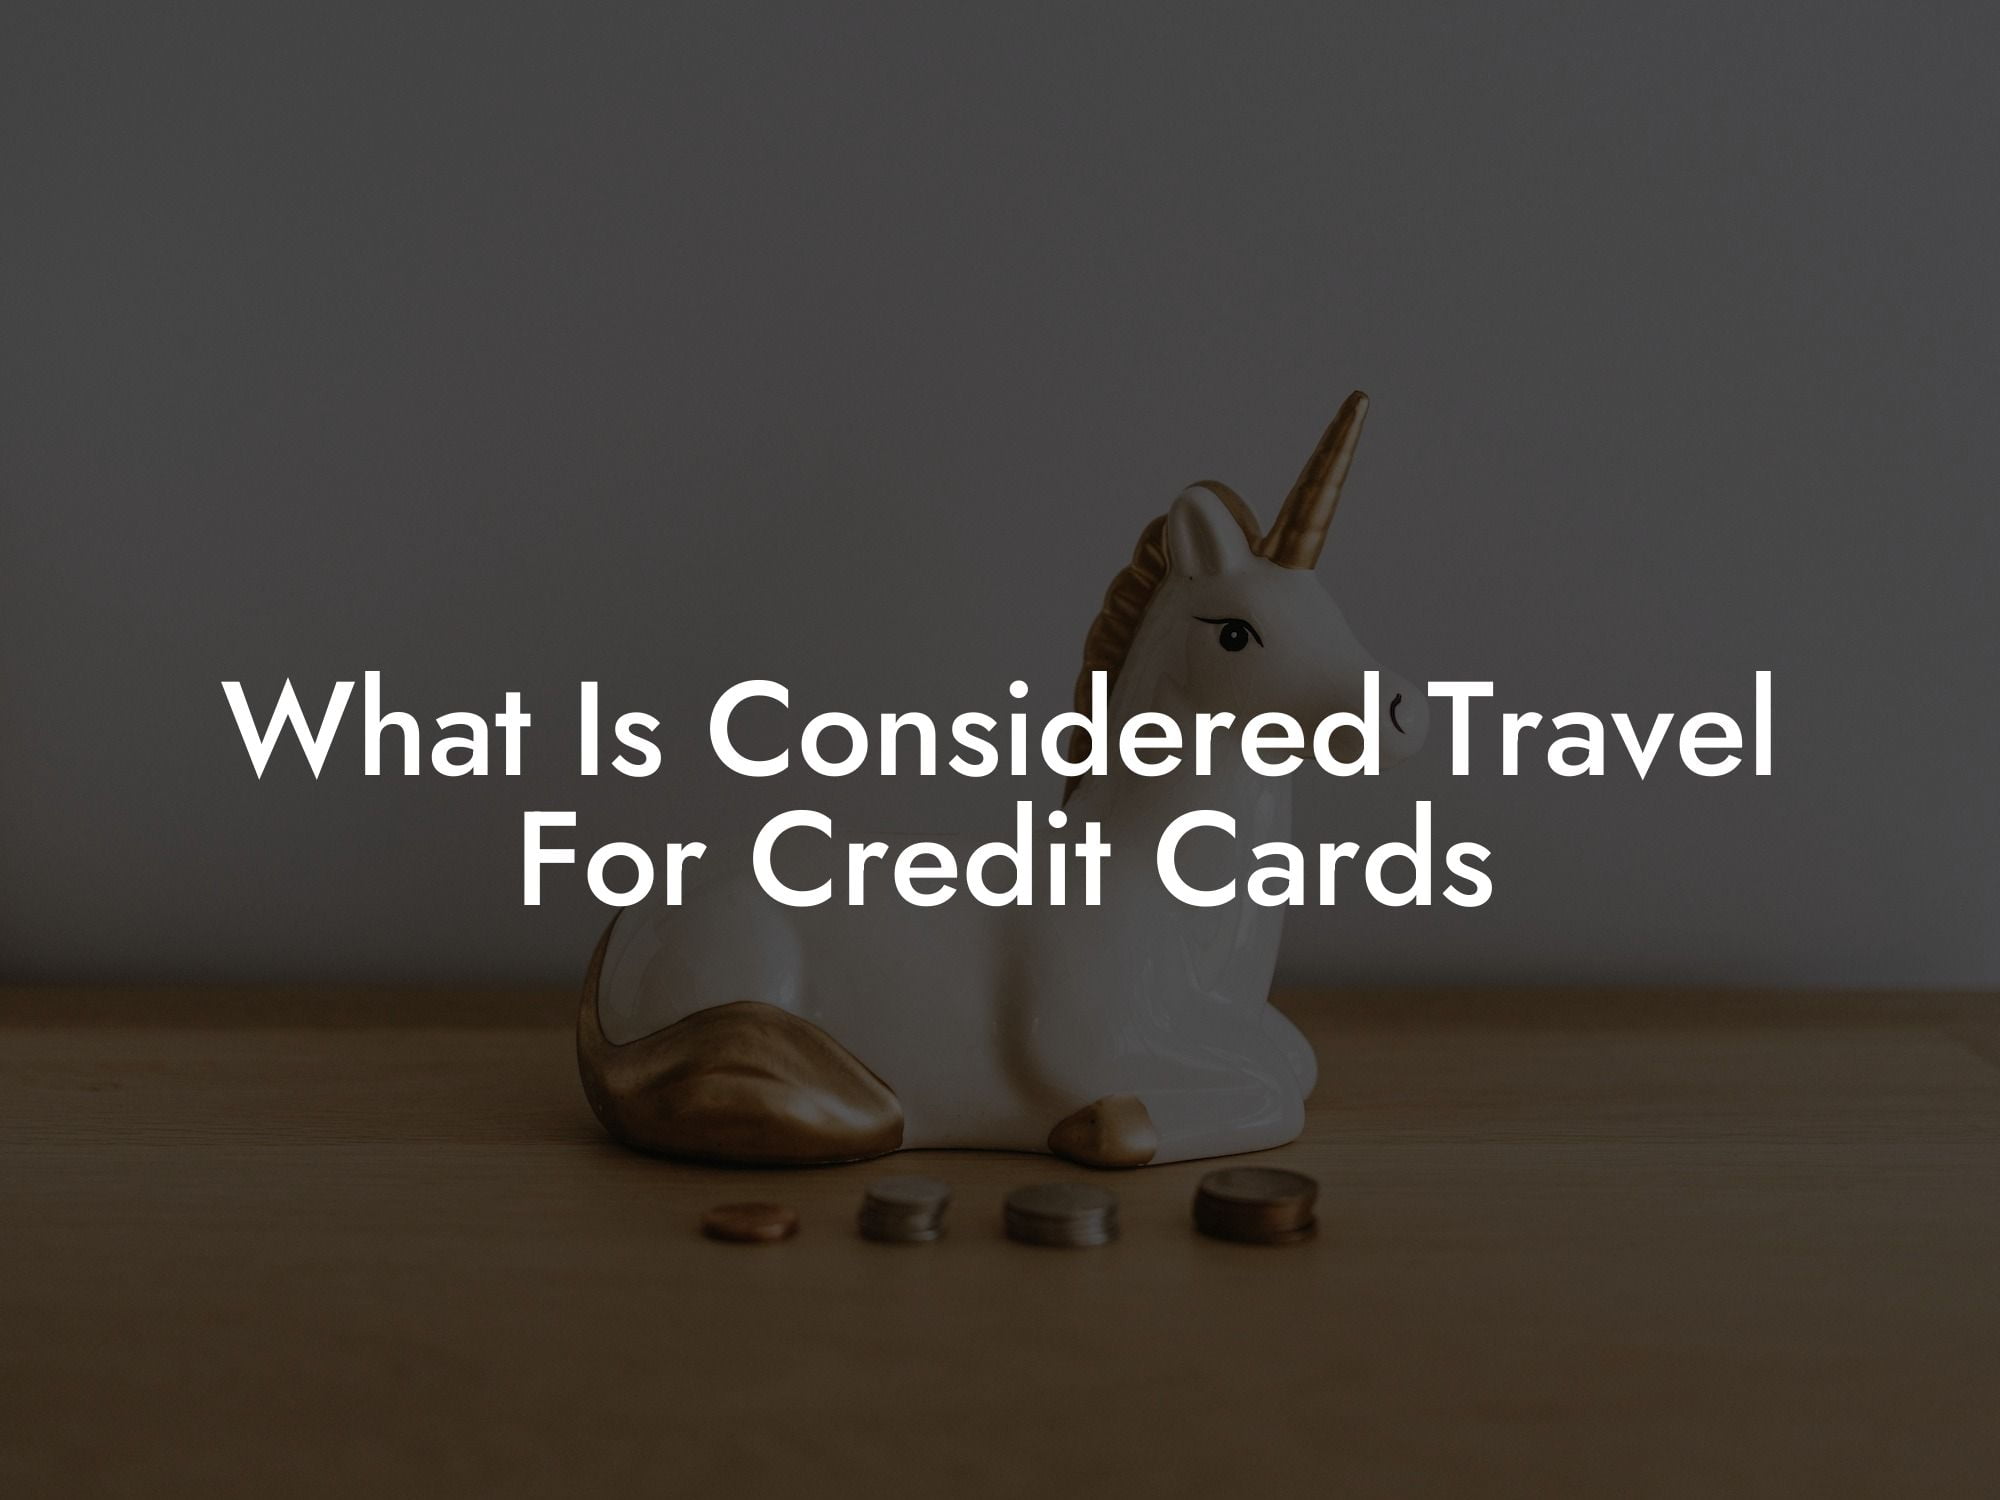 What Is Considered Travel For Credit Cards